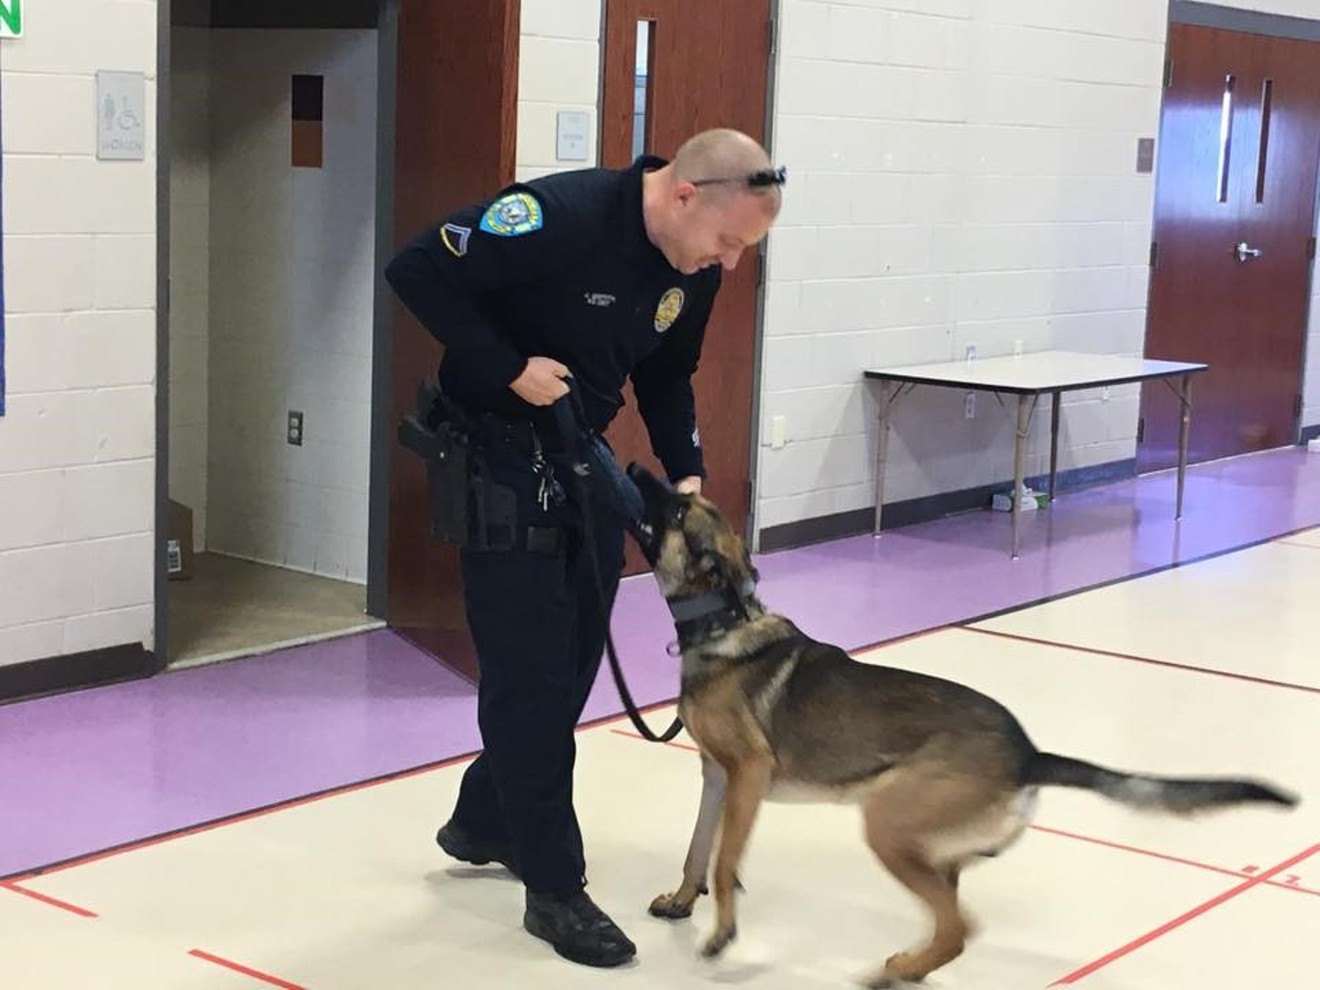 Officer Griffith shows off the skills of K-9 officer Narco in May 2017 at Four Peaks Elementary School, seven months after the dog allegedly attacked his daughter at home.